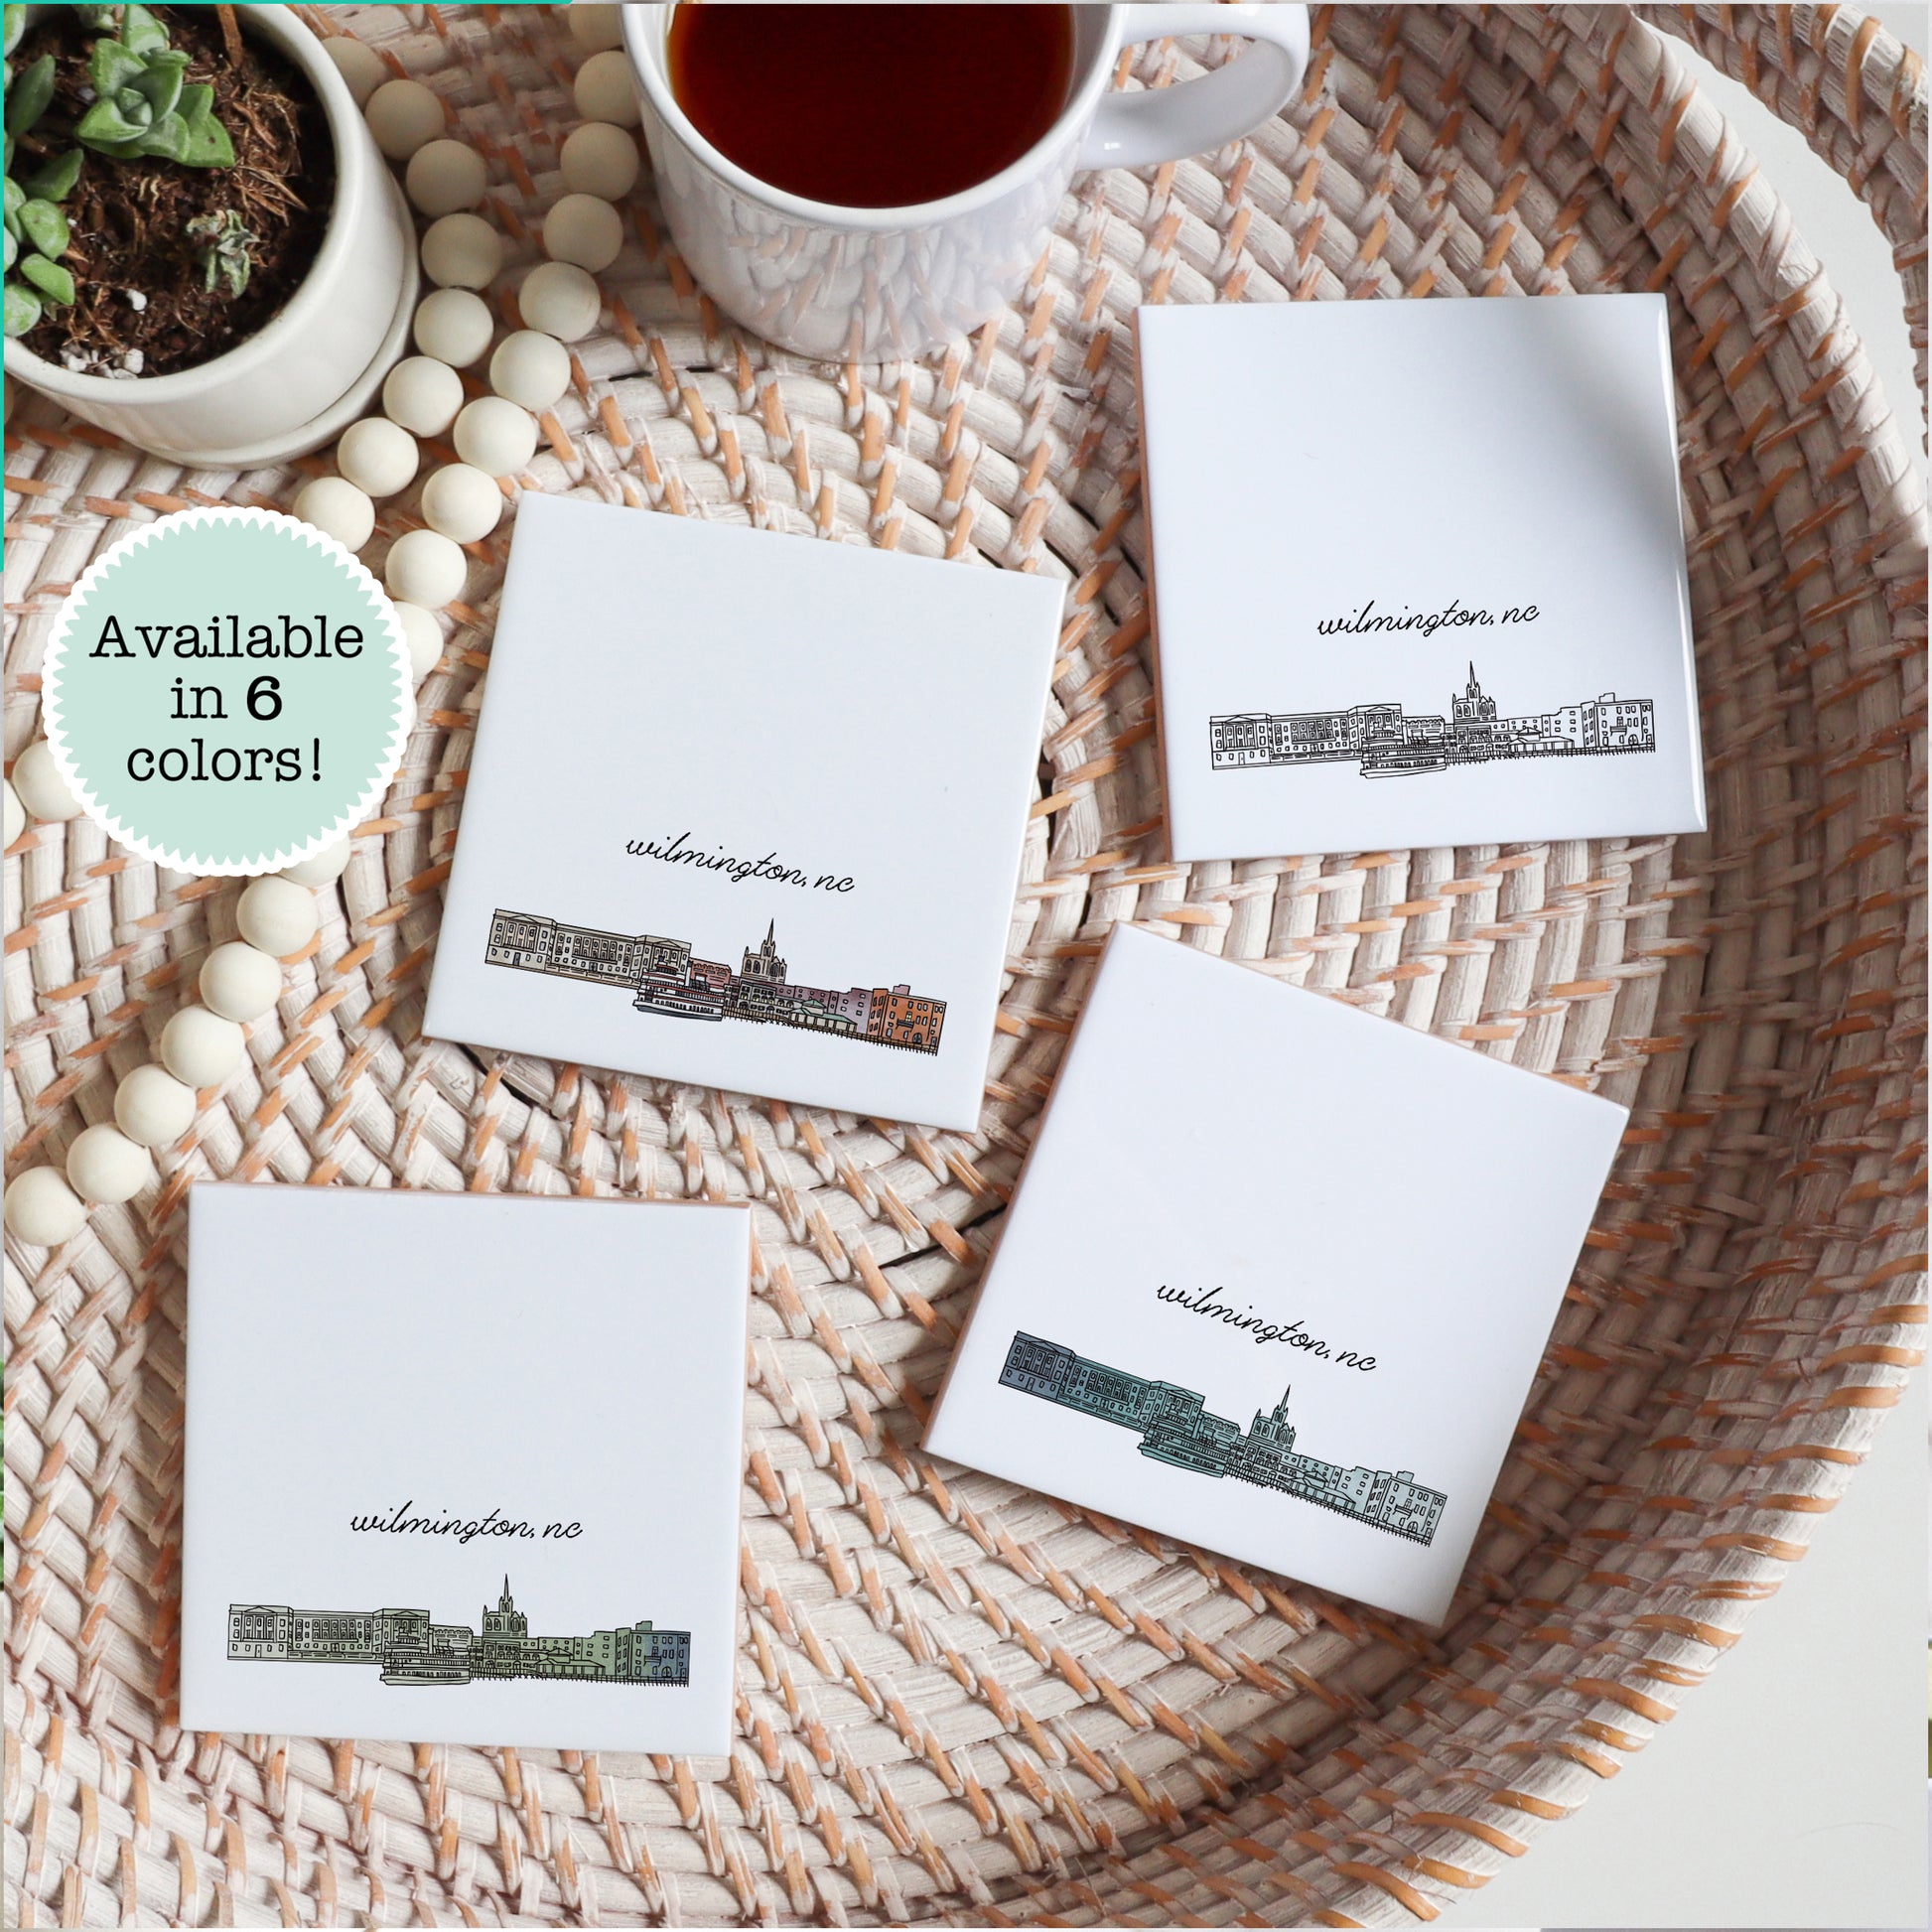 A city drawing of Wilmington NC on a set of ceramic coasters sitting on a tray with a cup of tea - Sparks House Co